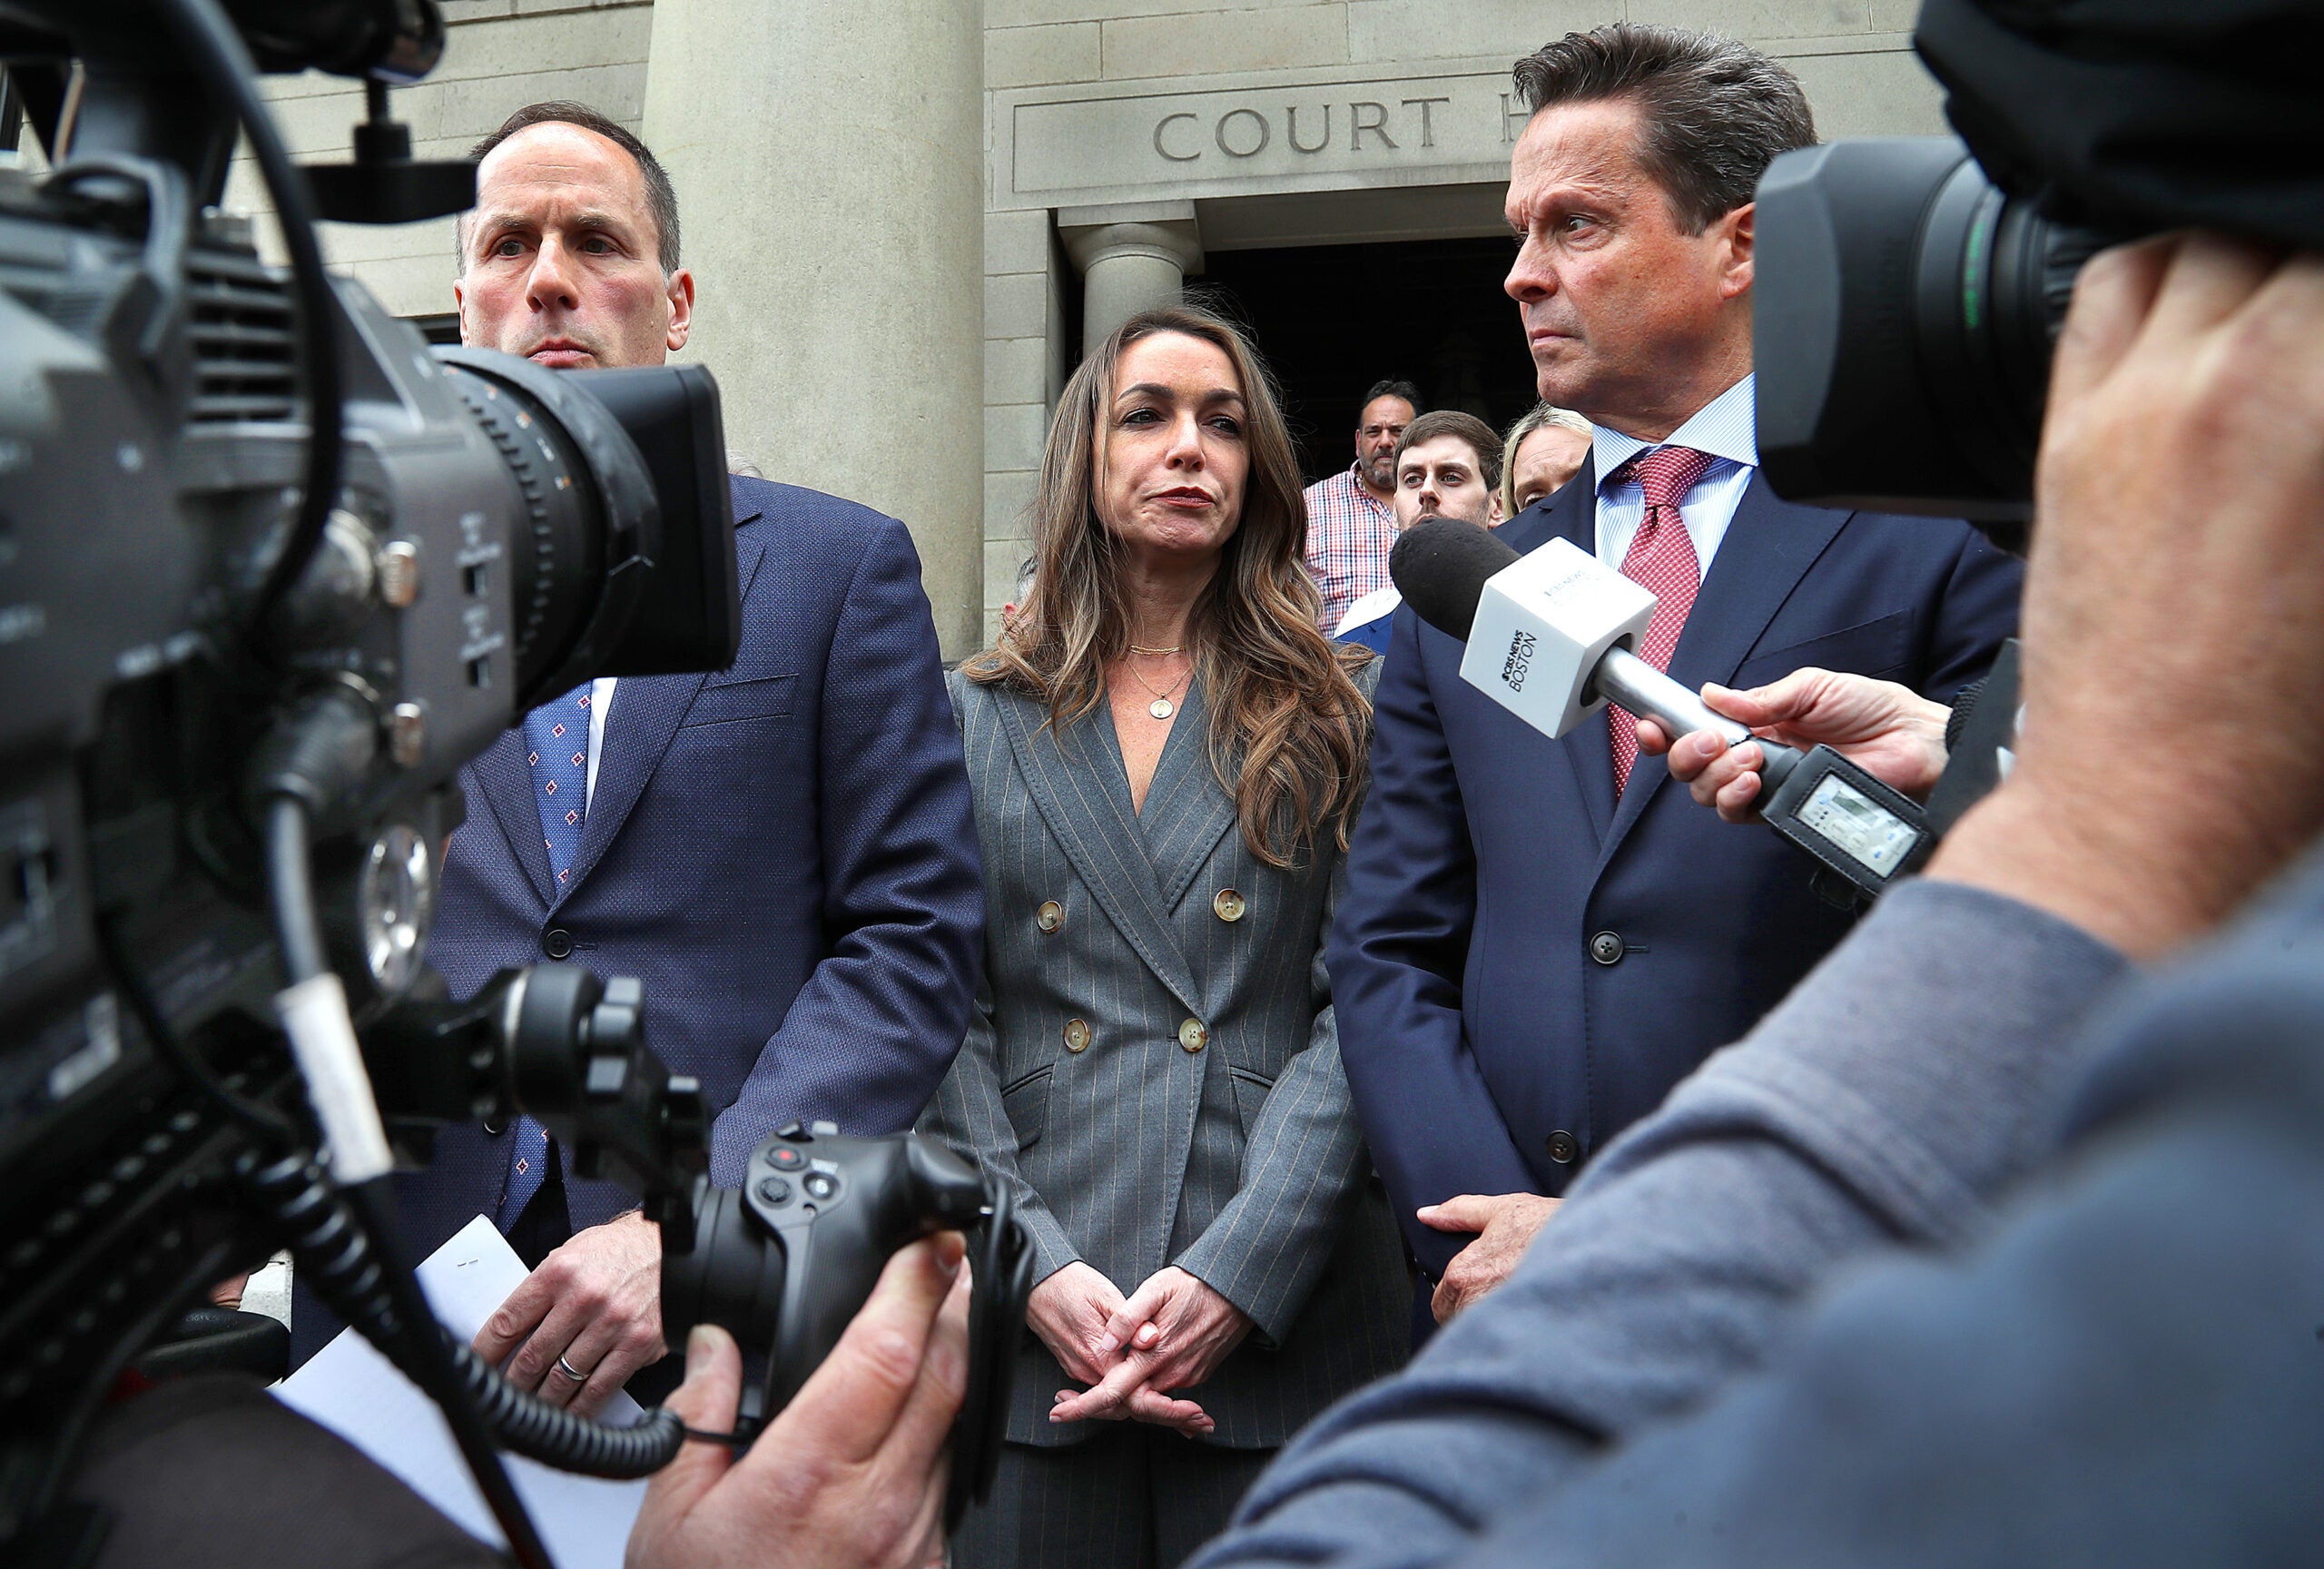 Karen Read, center, in a gray suit, stands on the steps of the courthouse, flanked by two of her lawyers. They are surrounded by members of the media holding cameras and microphones.